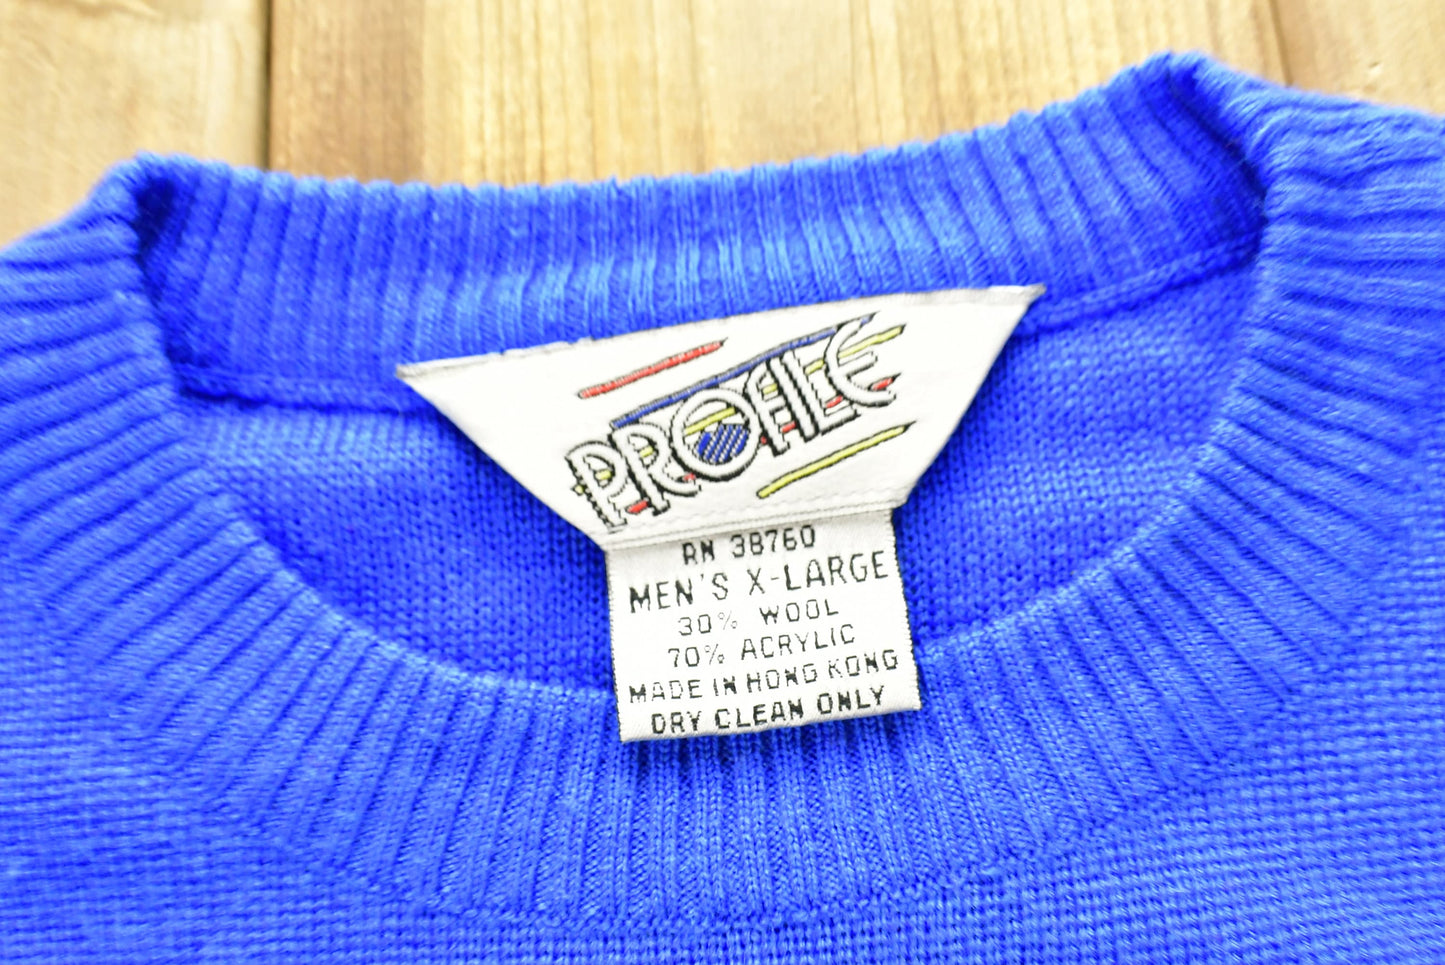 Vintage 1980s Profile Wool Blend Color Block Knitted Sweater / Vintage 90s Crewneck / Outdoor / Sweatshirt / Abstract Graphic